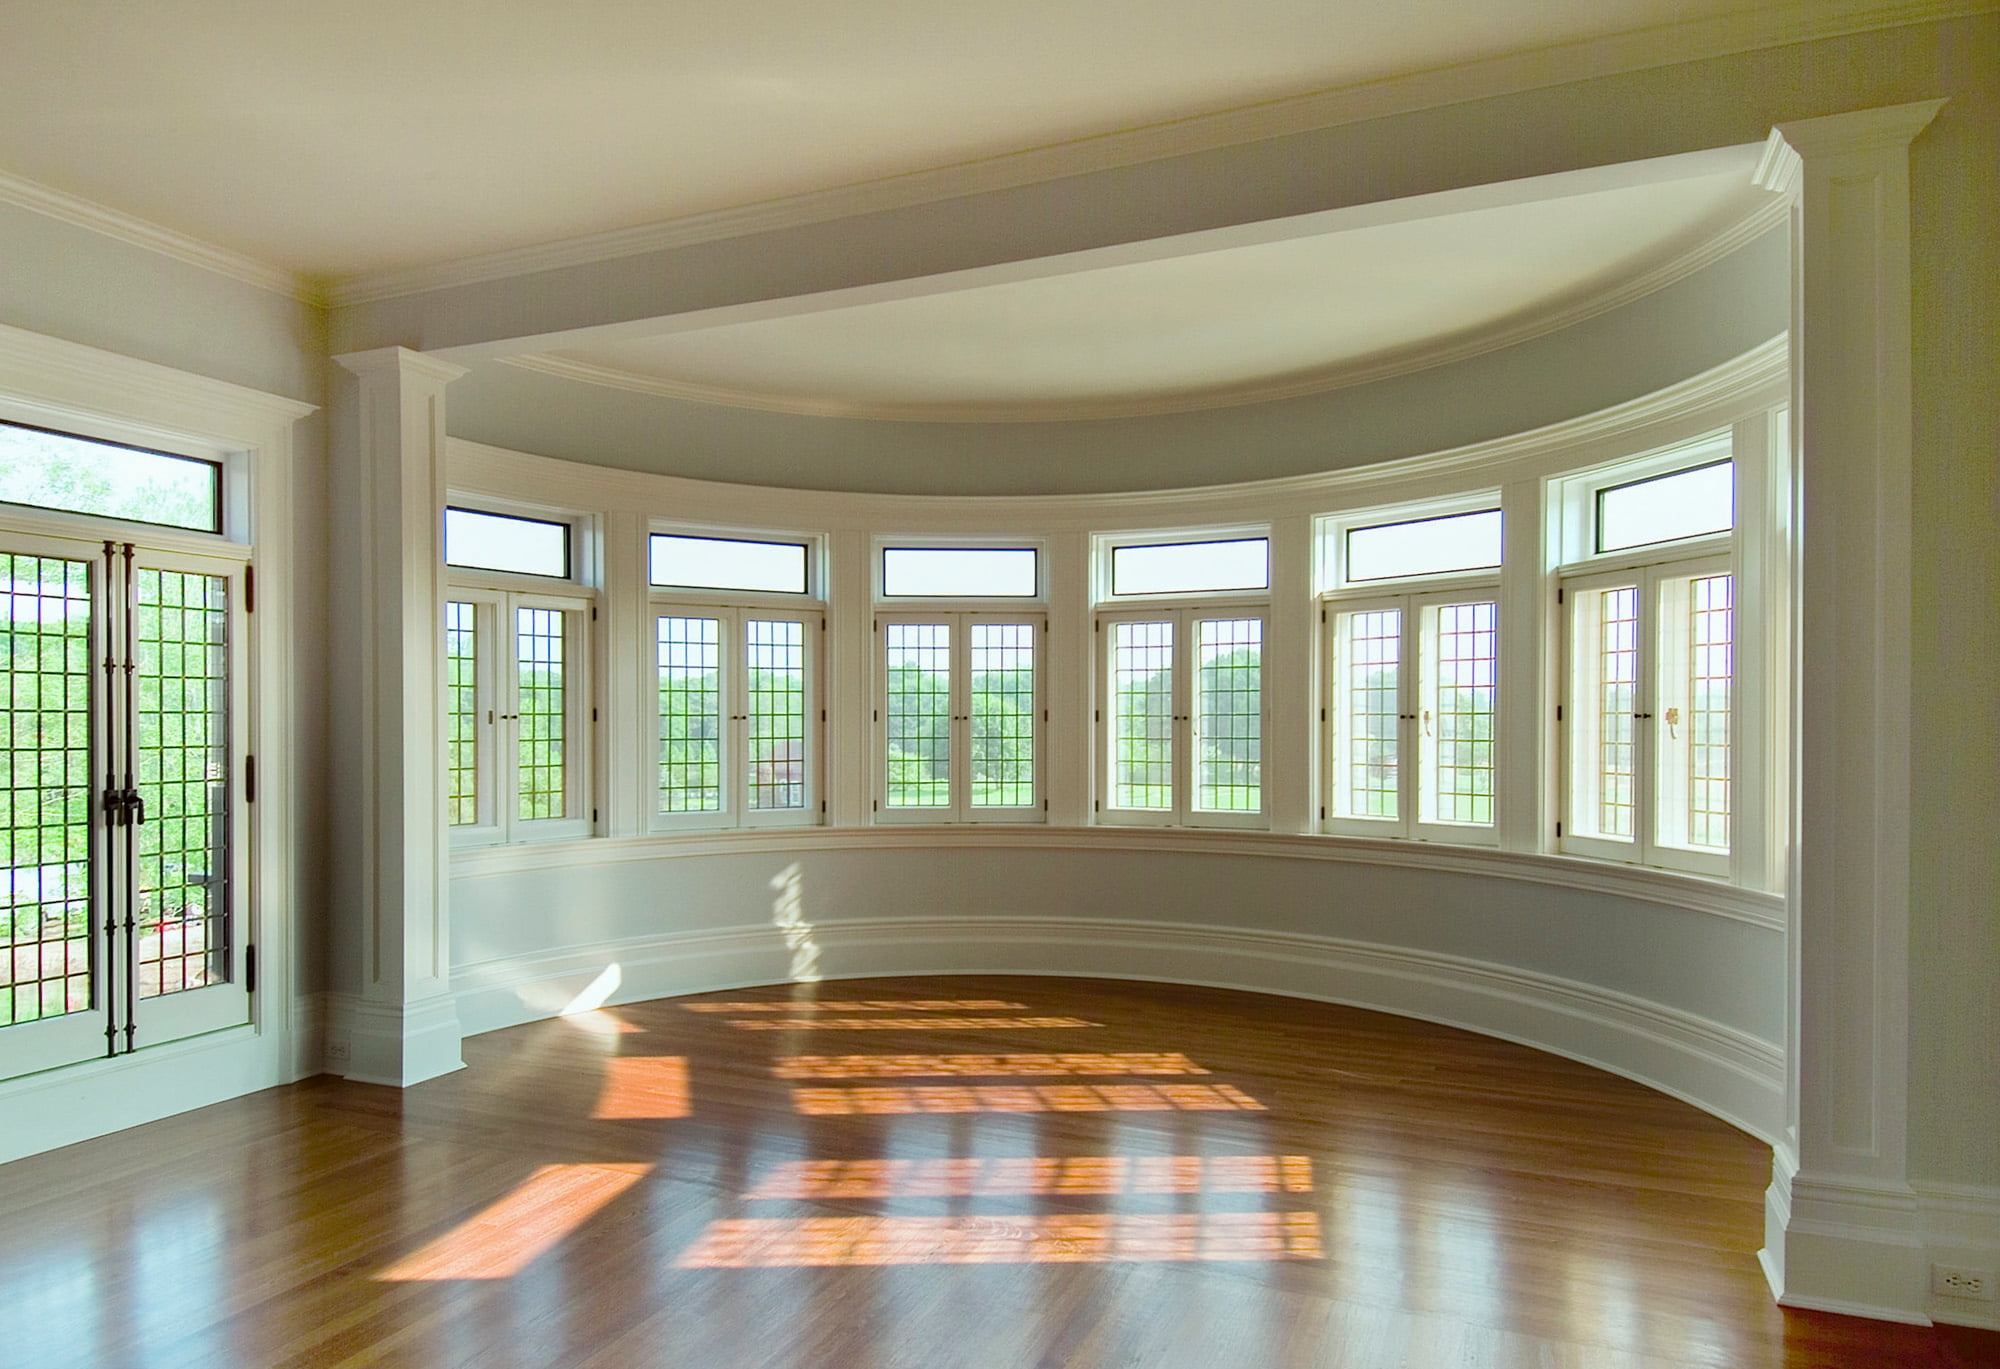 north haven home interior curved room